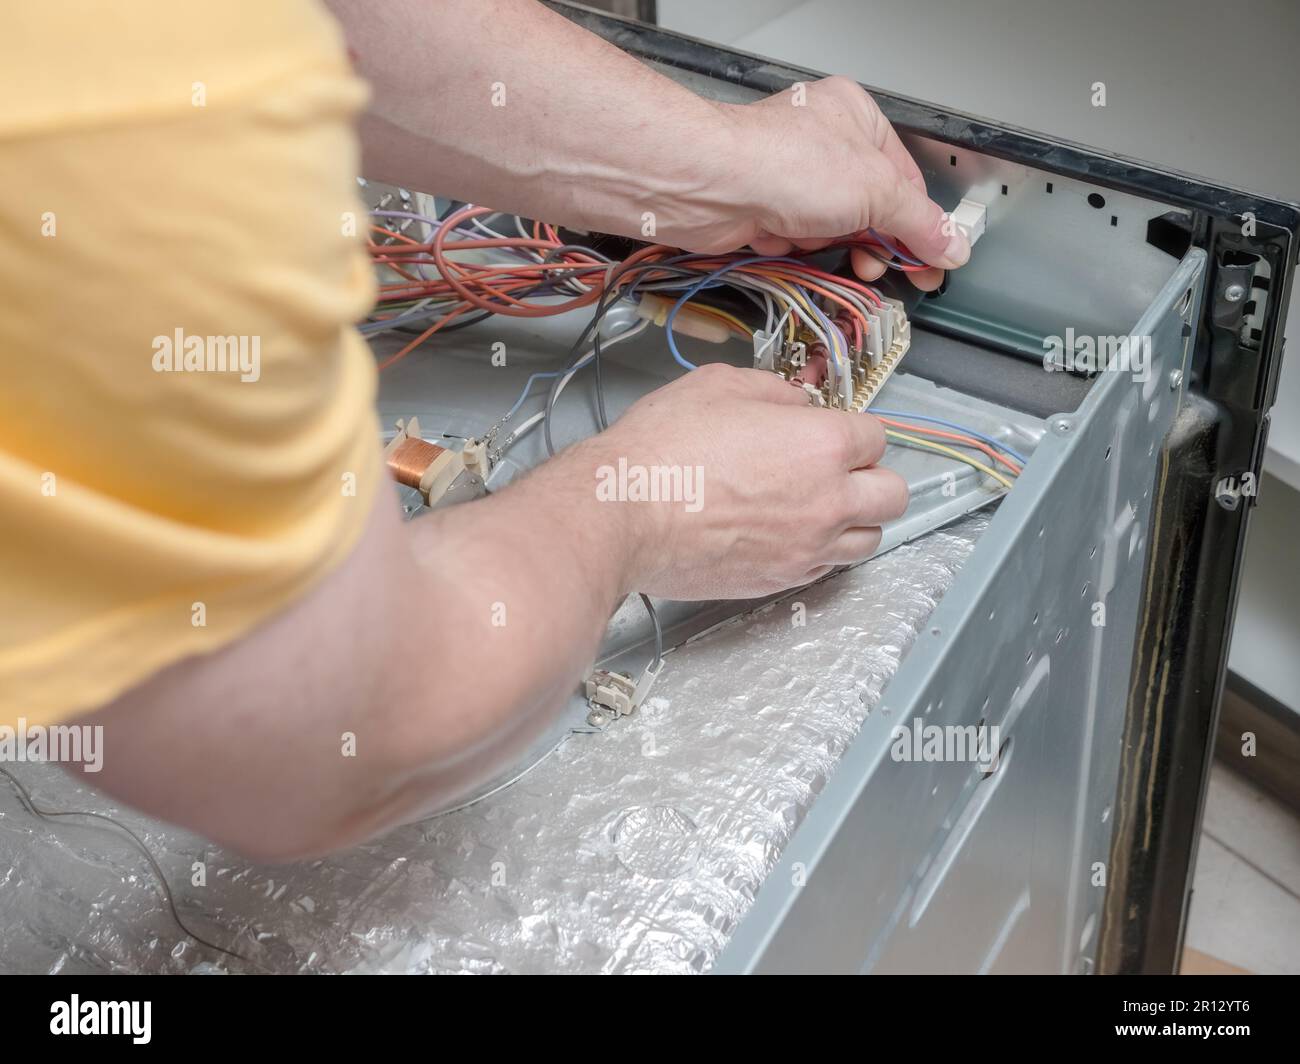 Serviceman locating faulty parts in the broken electric oven Stock Photo